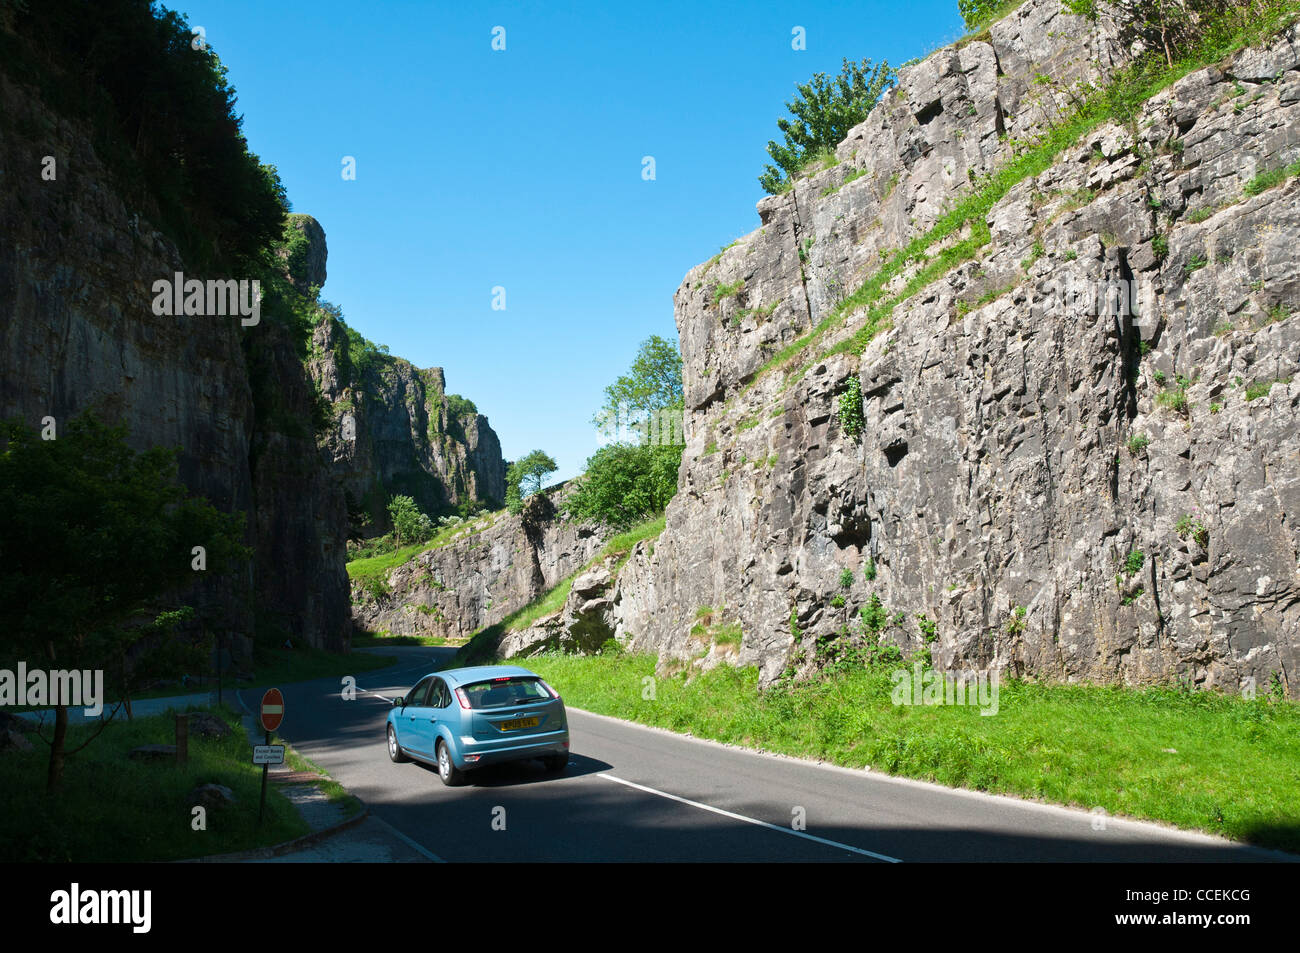 A sunny summer day in the world famous Cheddar Gorge in somerset with a blue car driving along the road Stock Photo